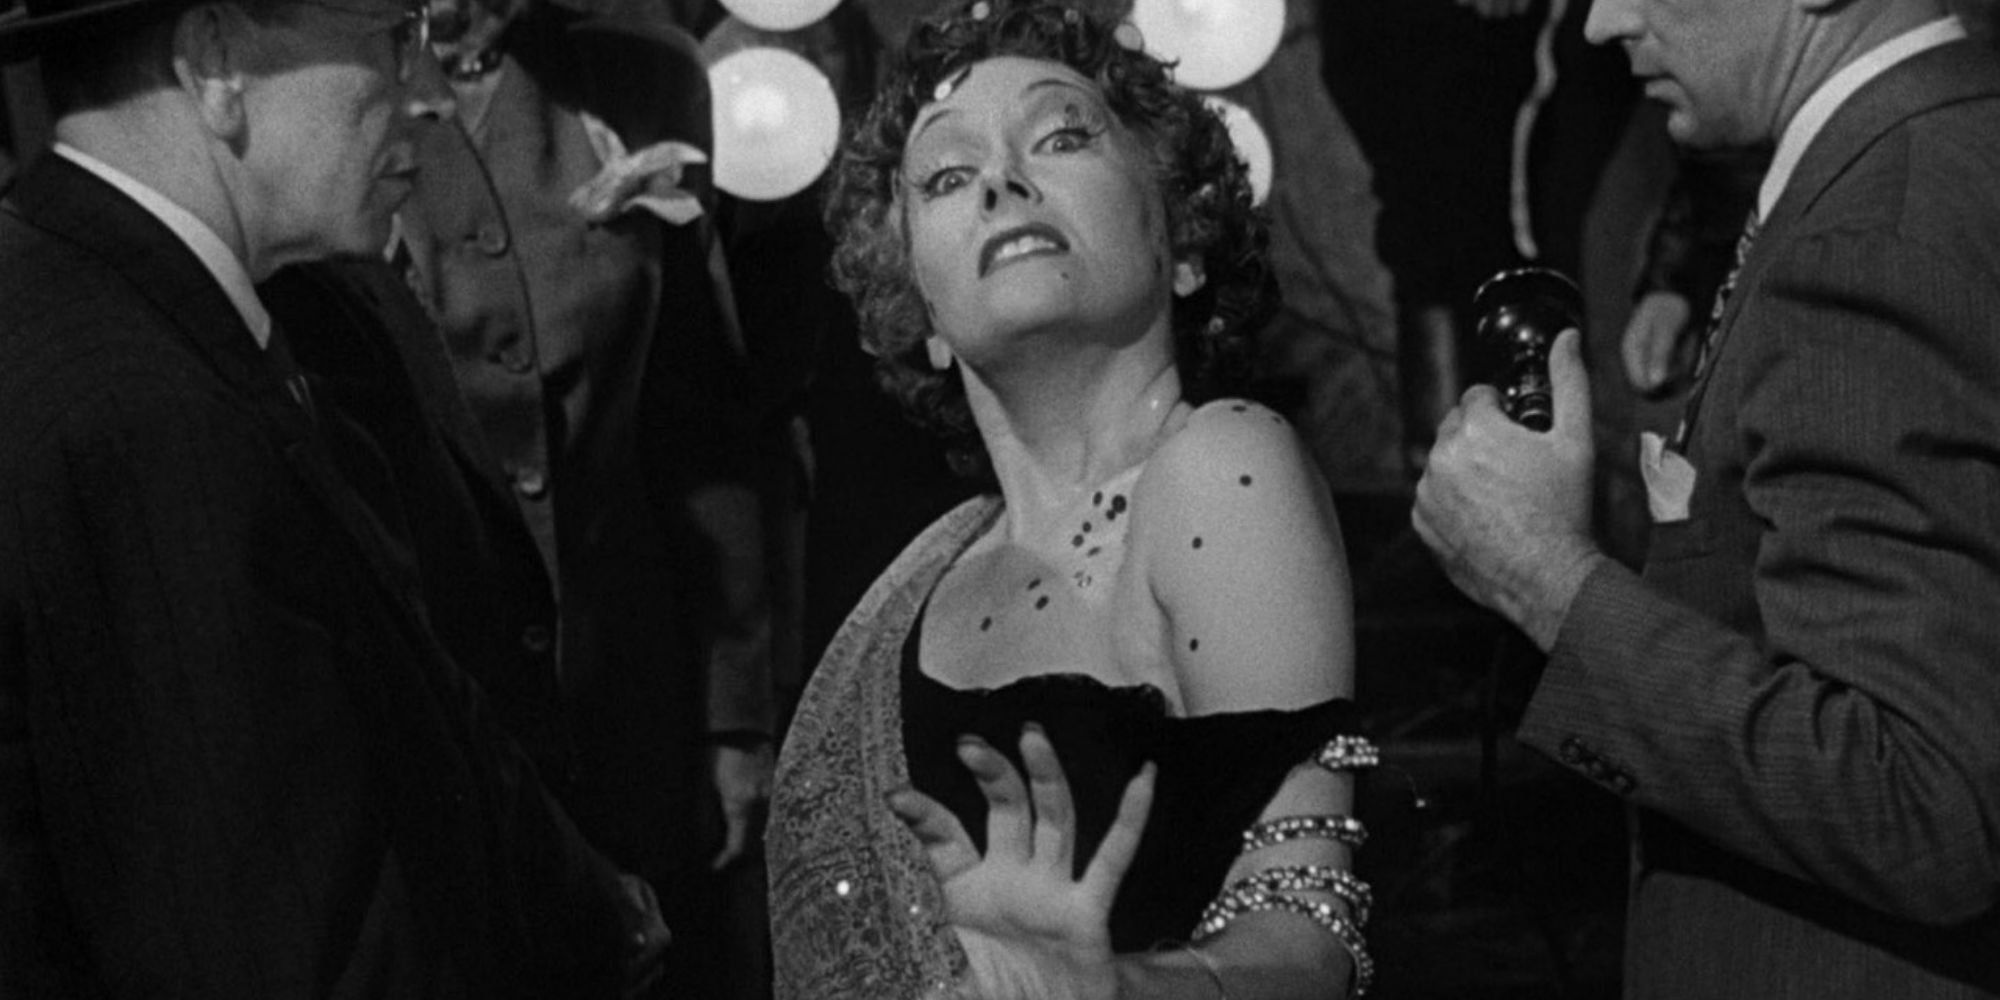 Norma Desmond glides through a pack of photographers announcing she is ready for her close-up.